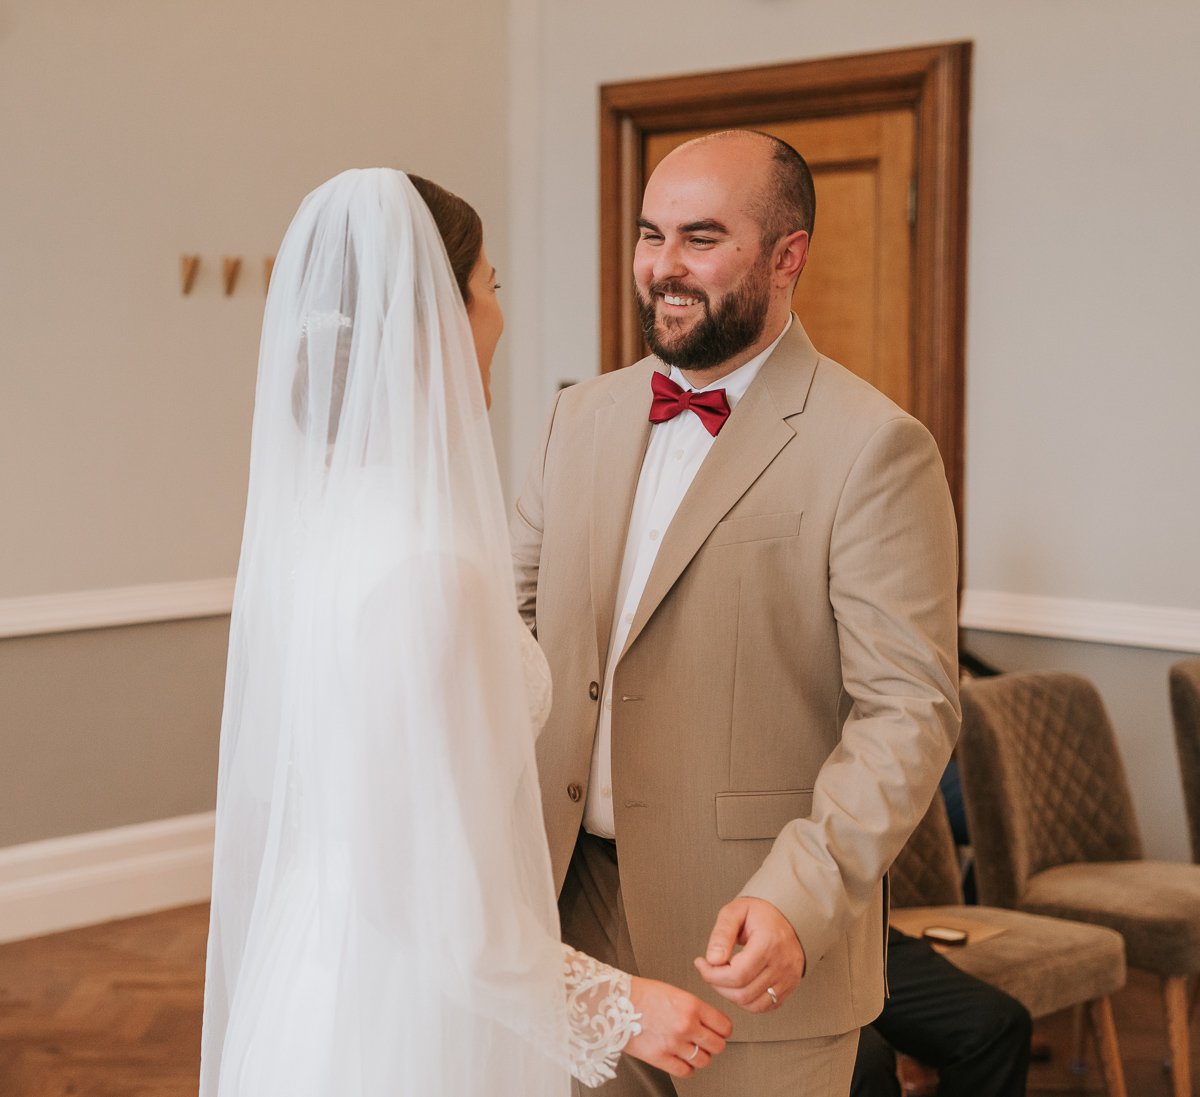  Edina and Zsolt, the bride and groom, face each other smiling as they get married in the wedding ceremony room at Islington Town Hall. 